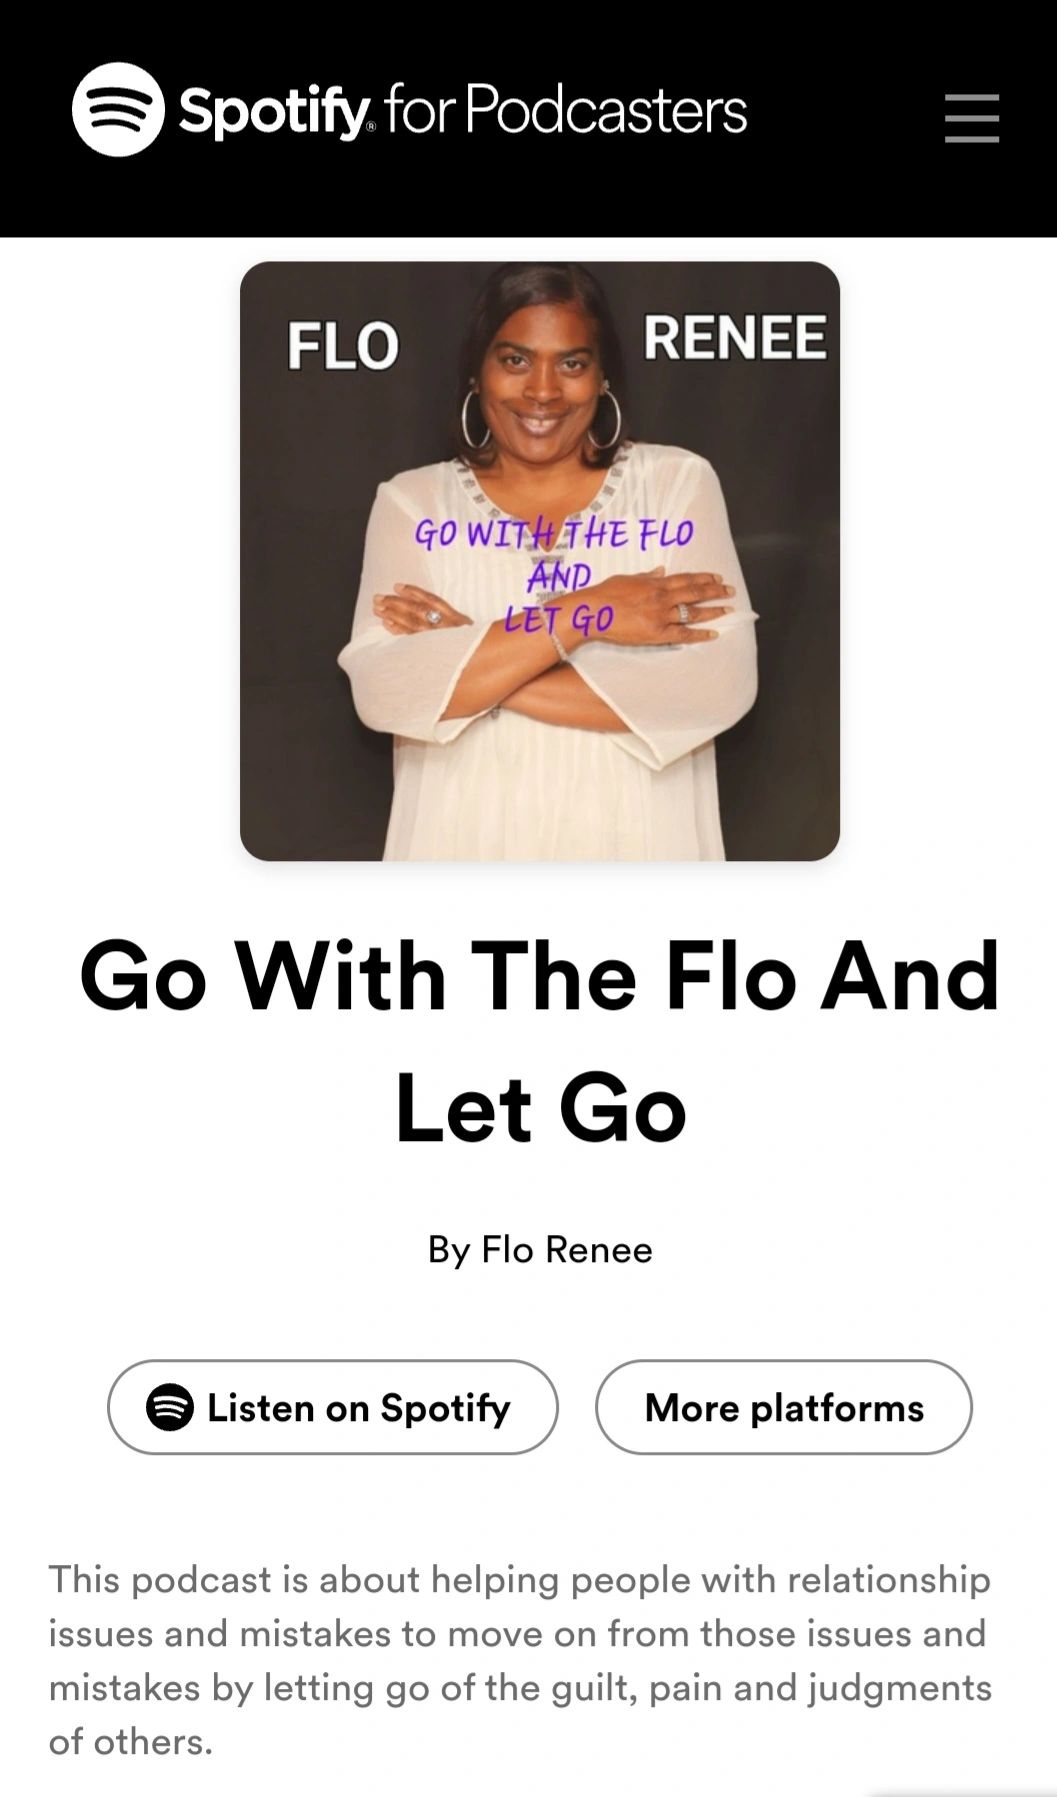 Podcast "Go With The Flo And Let Go" on Spotify and Spotify For Podcasters.